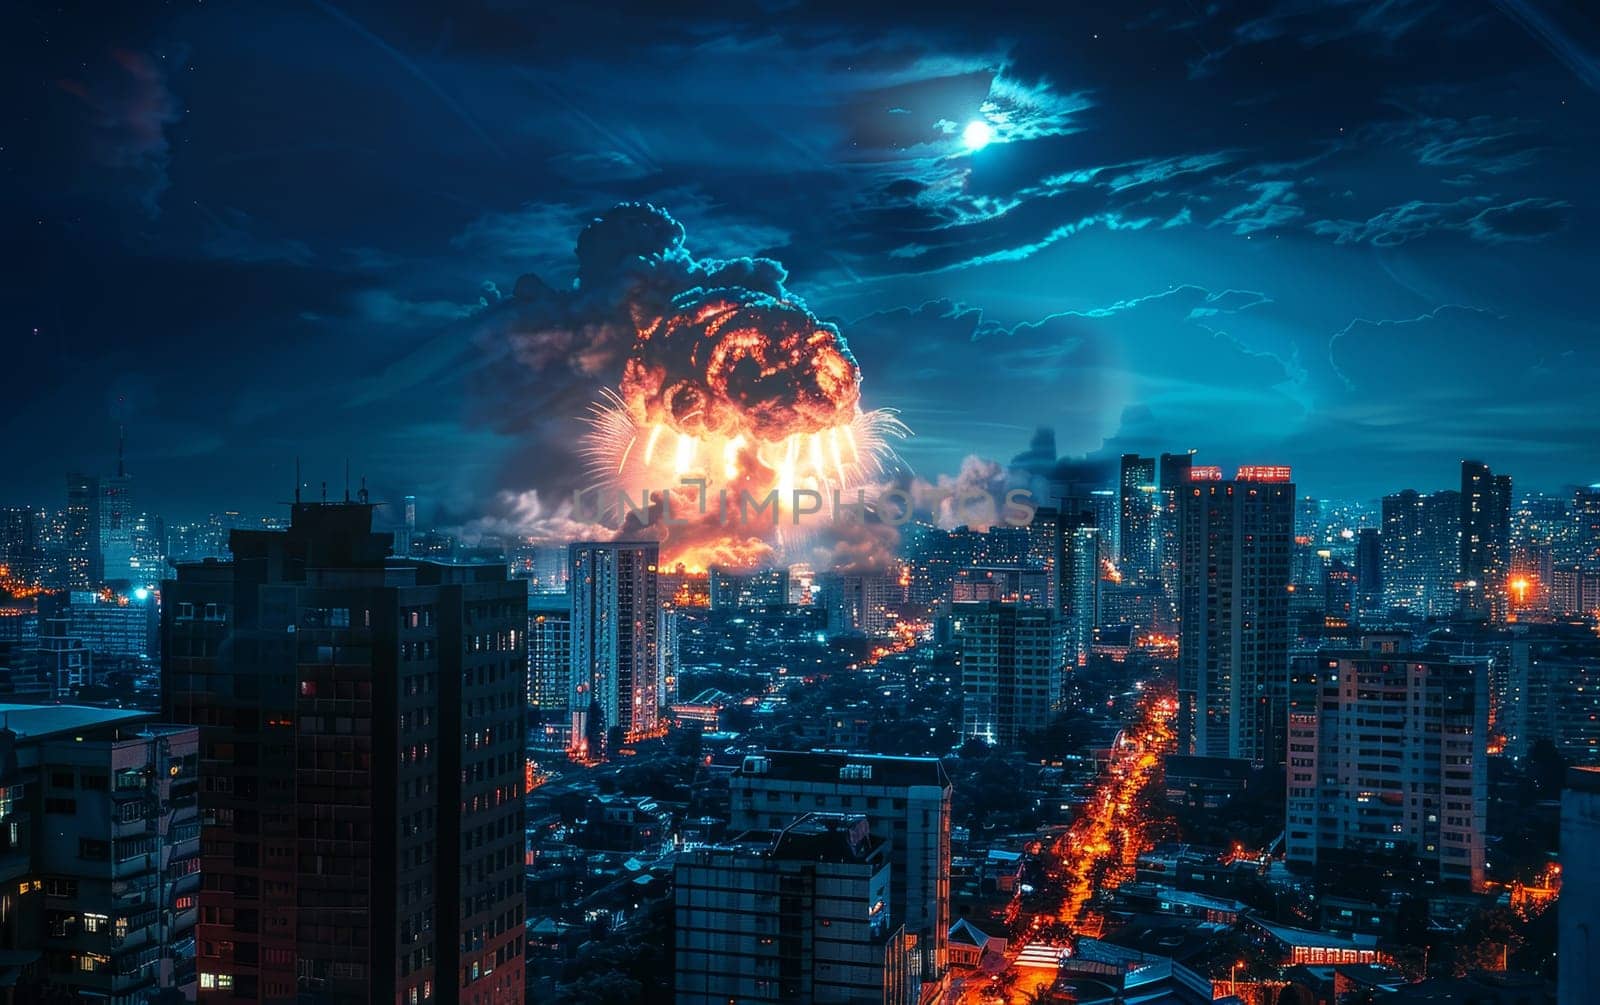 A spectacular nuclear explosion erupts in the night sky above a city, its fiery plumes creating a stark contrast against the urban skyline